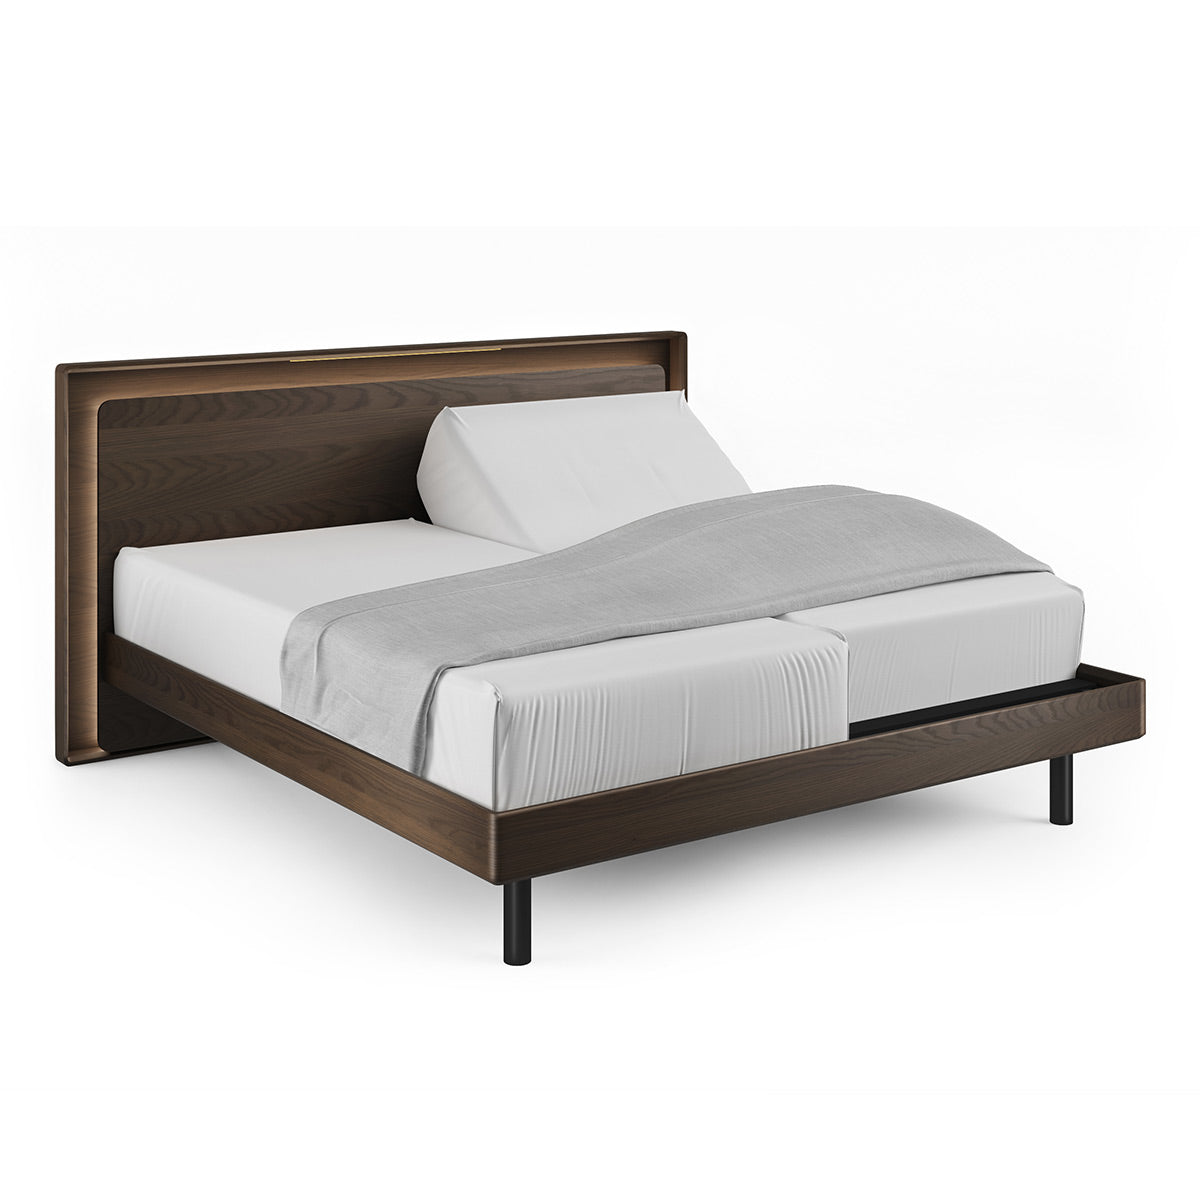 BDI Up-LINQ 9119 King Size Bed with Dual-Level Headboard, Dimmable Accent Lighting, and Integrated Power Stations (Toasted Oak)